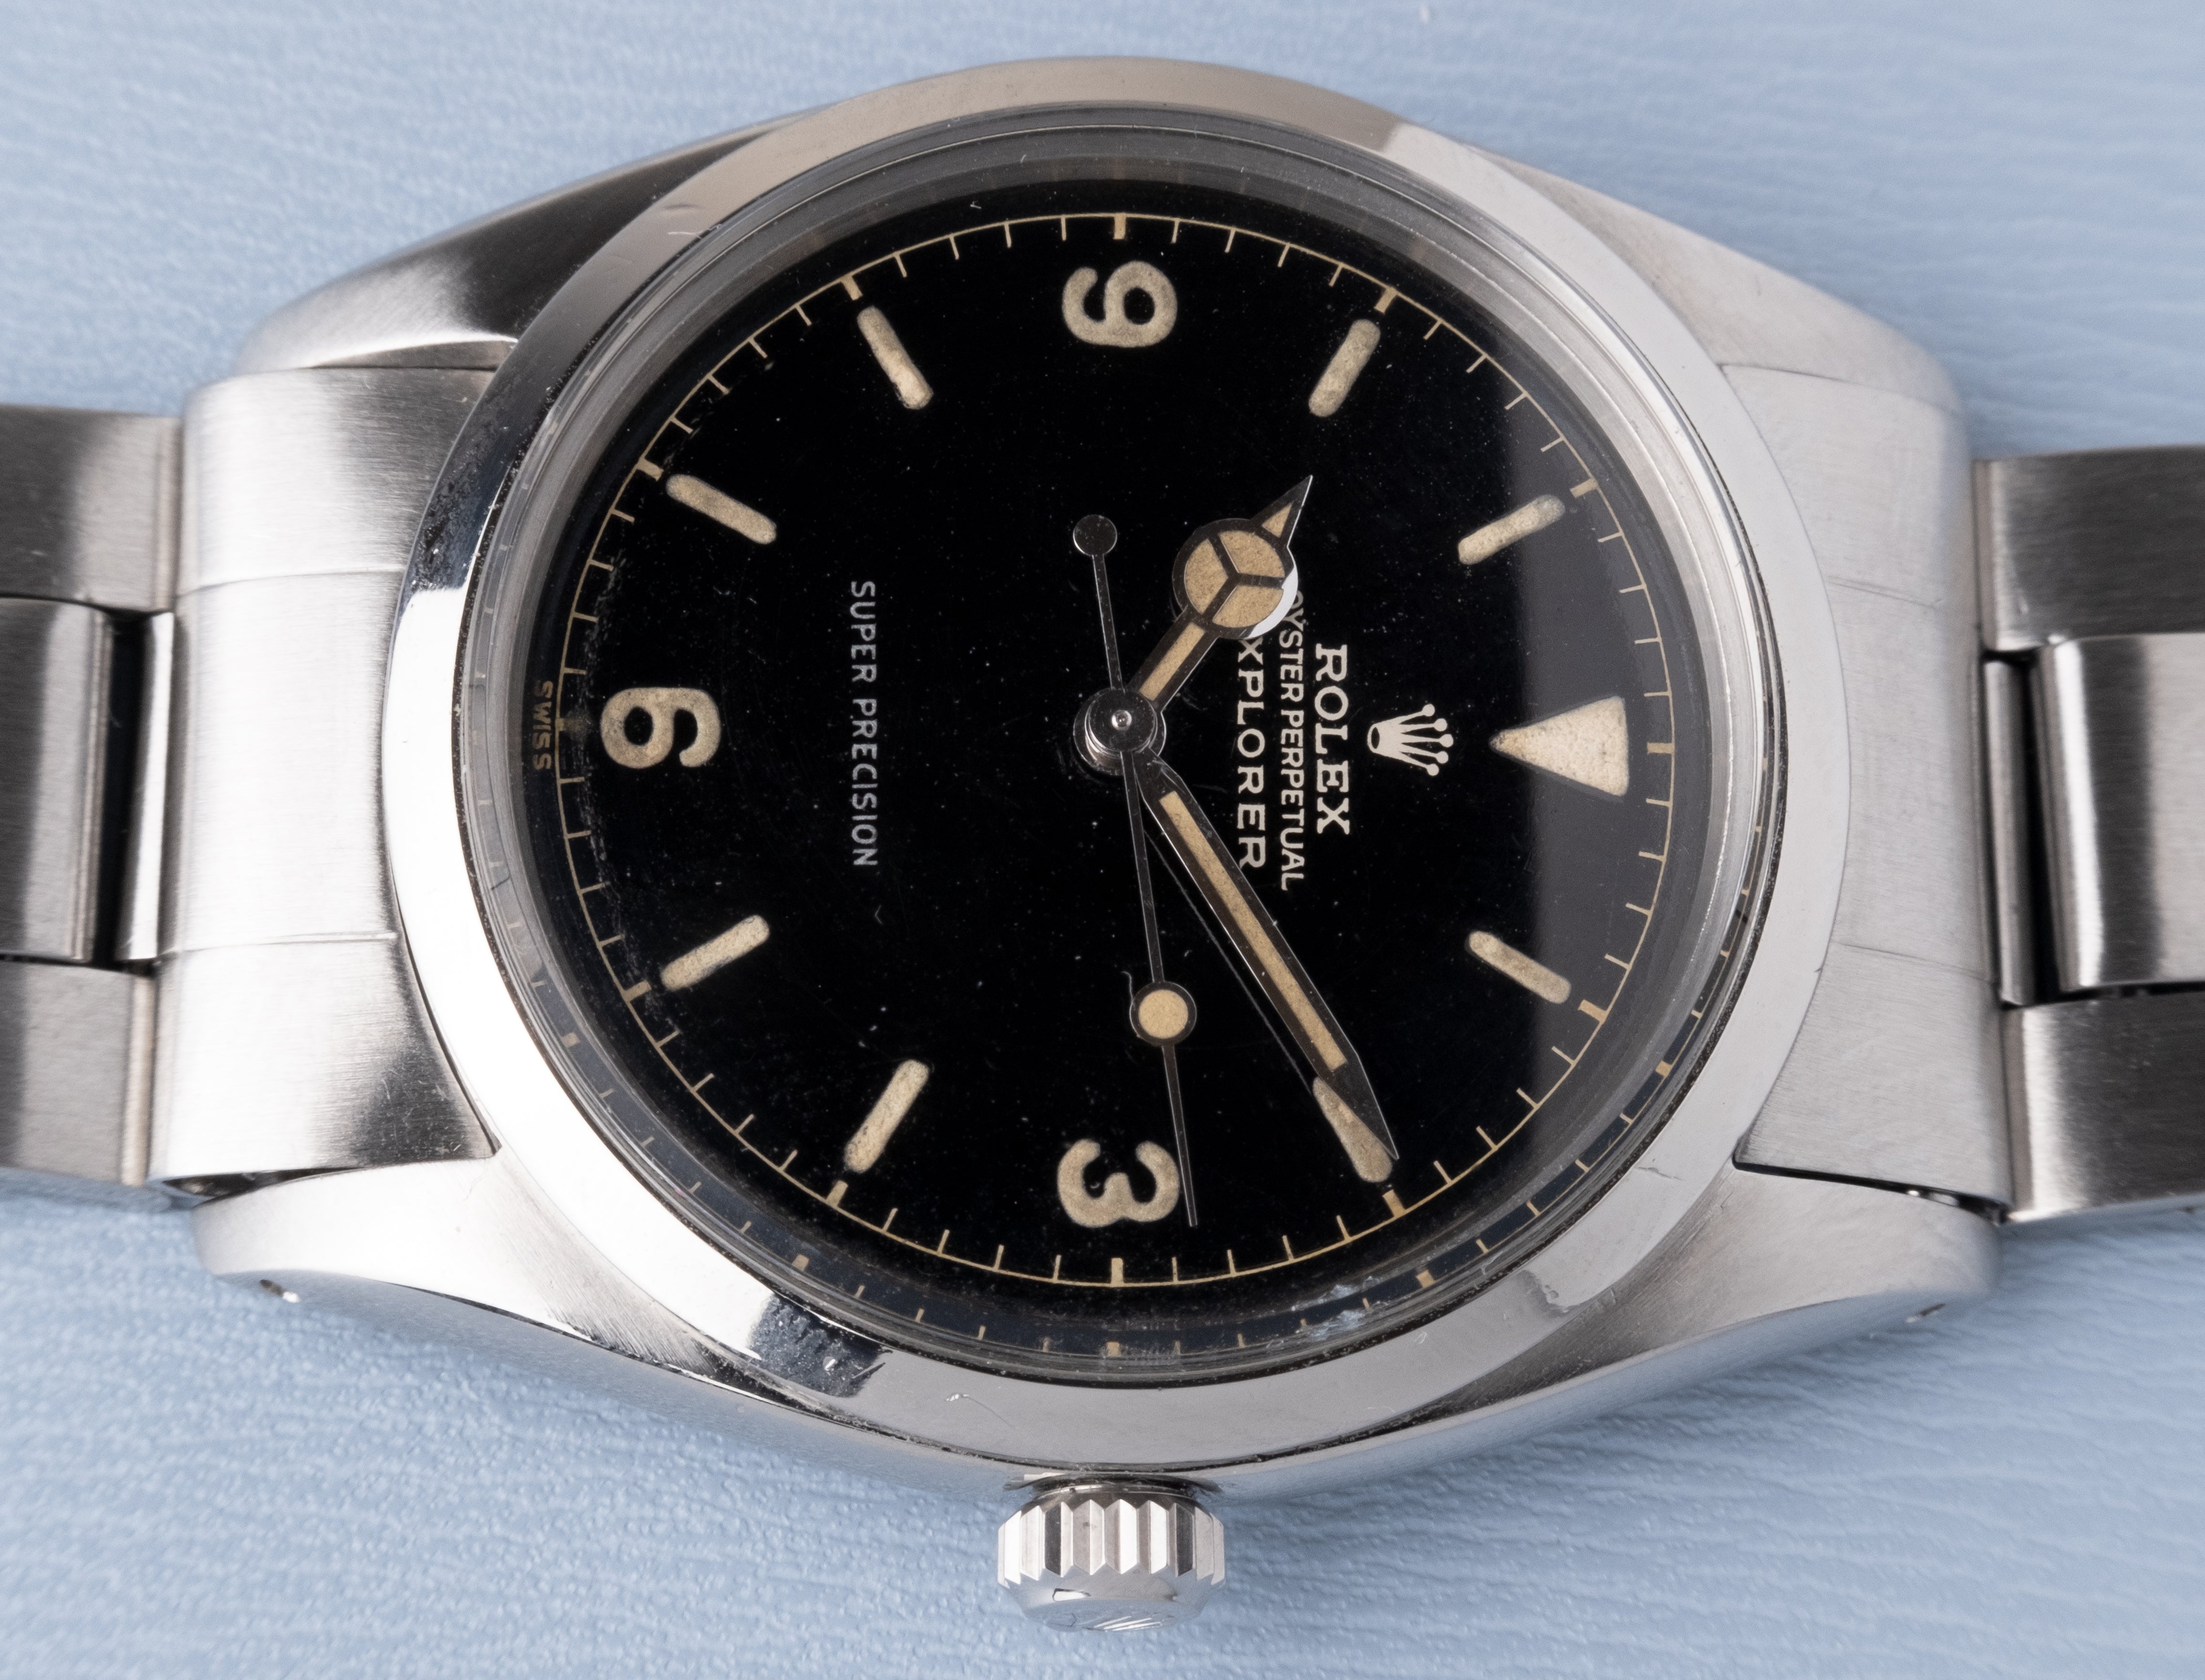 ROLEX Explorer Ref. 5504 Chapter Ring Gloss "Exclamation Point" Dial (1963)